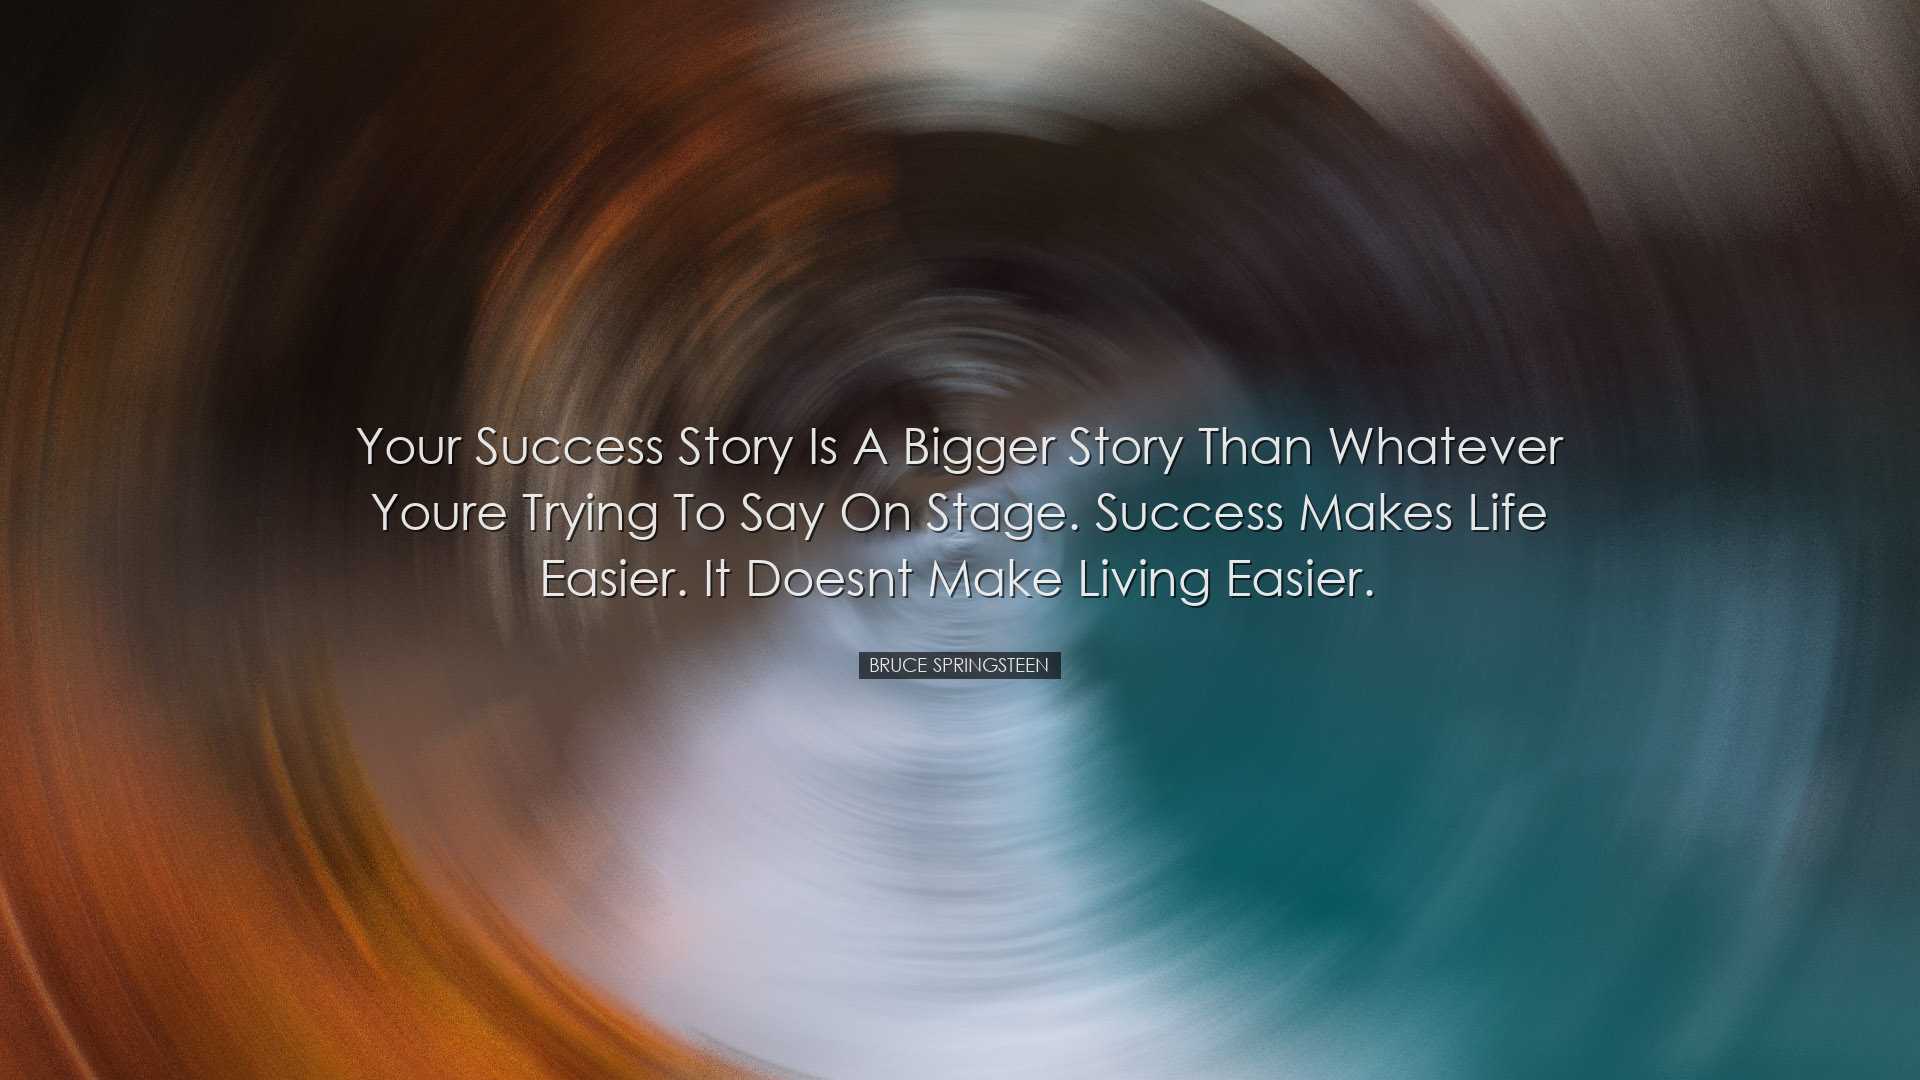 Your success story is a bigger story than whatever youre trying to